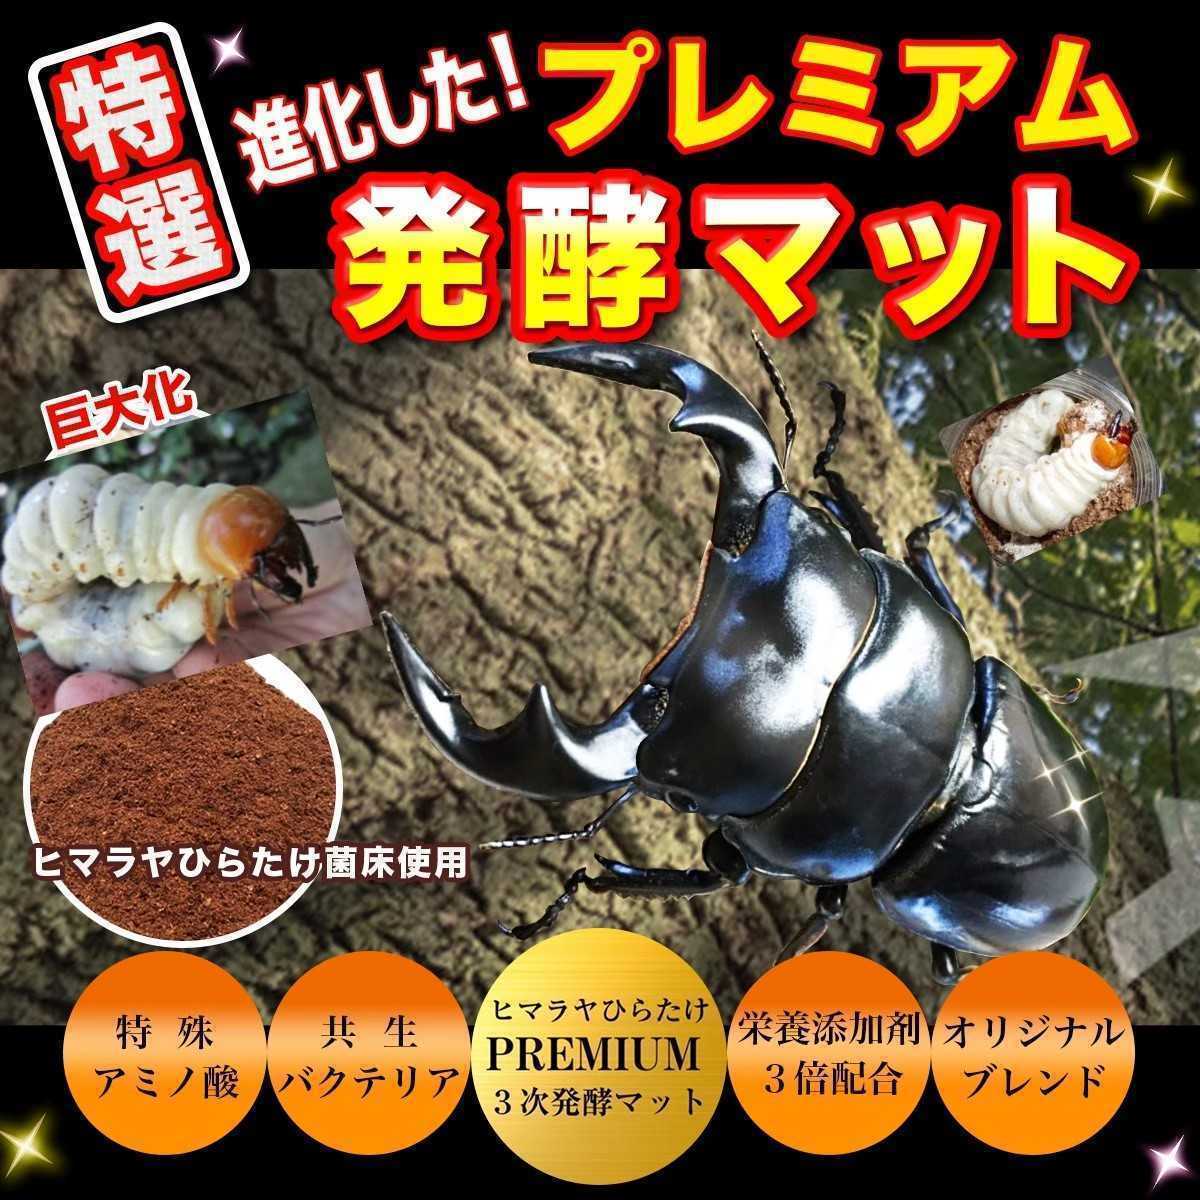  Miyama, saw ....! stag beetle larva . inserting only! convenience! clear bottle entering premium departure . mat [20ps.@]tore Hello s* chitosan combination 